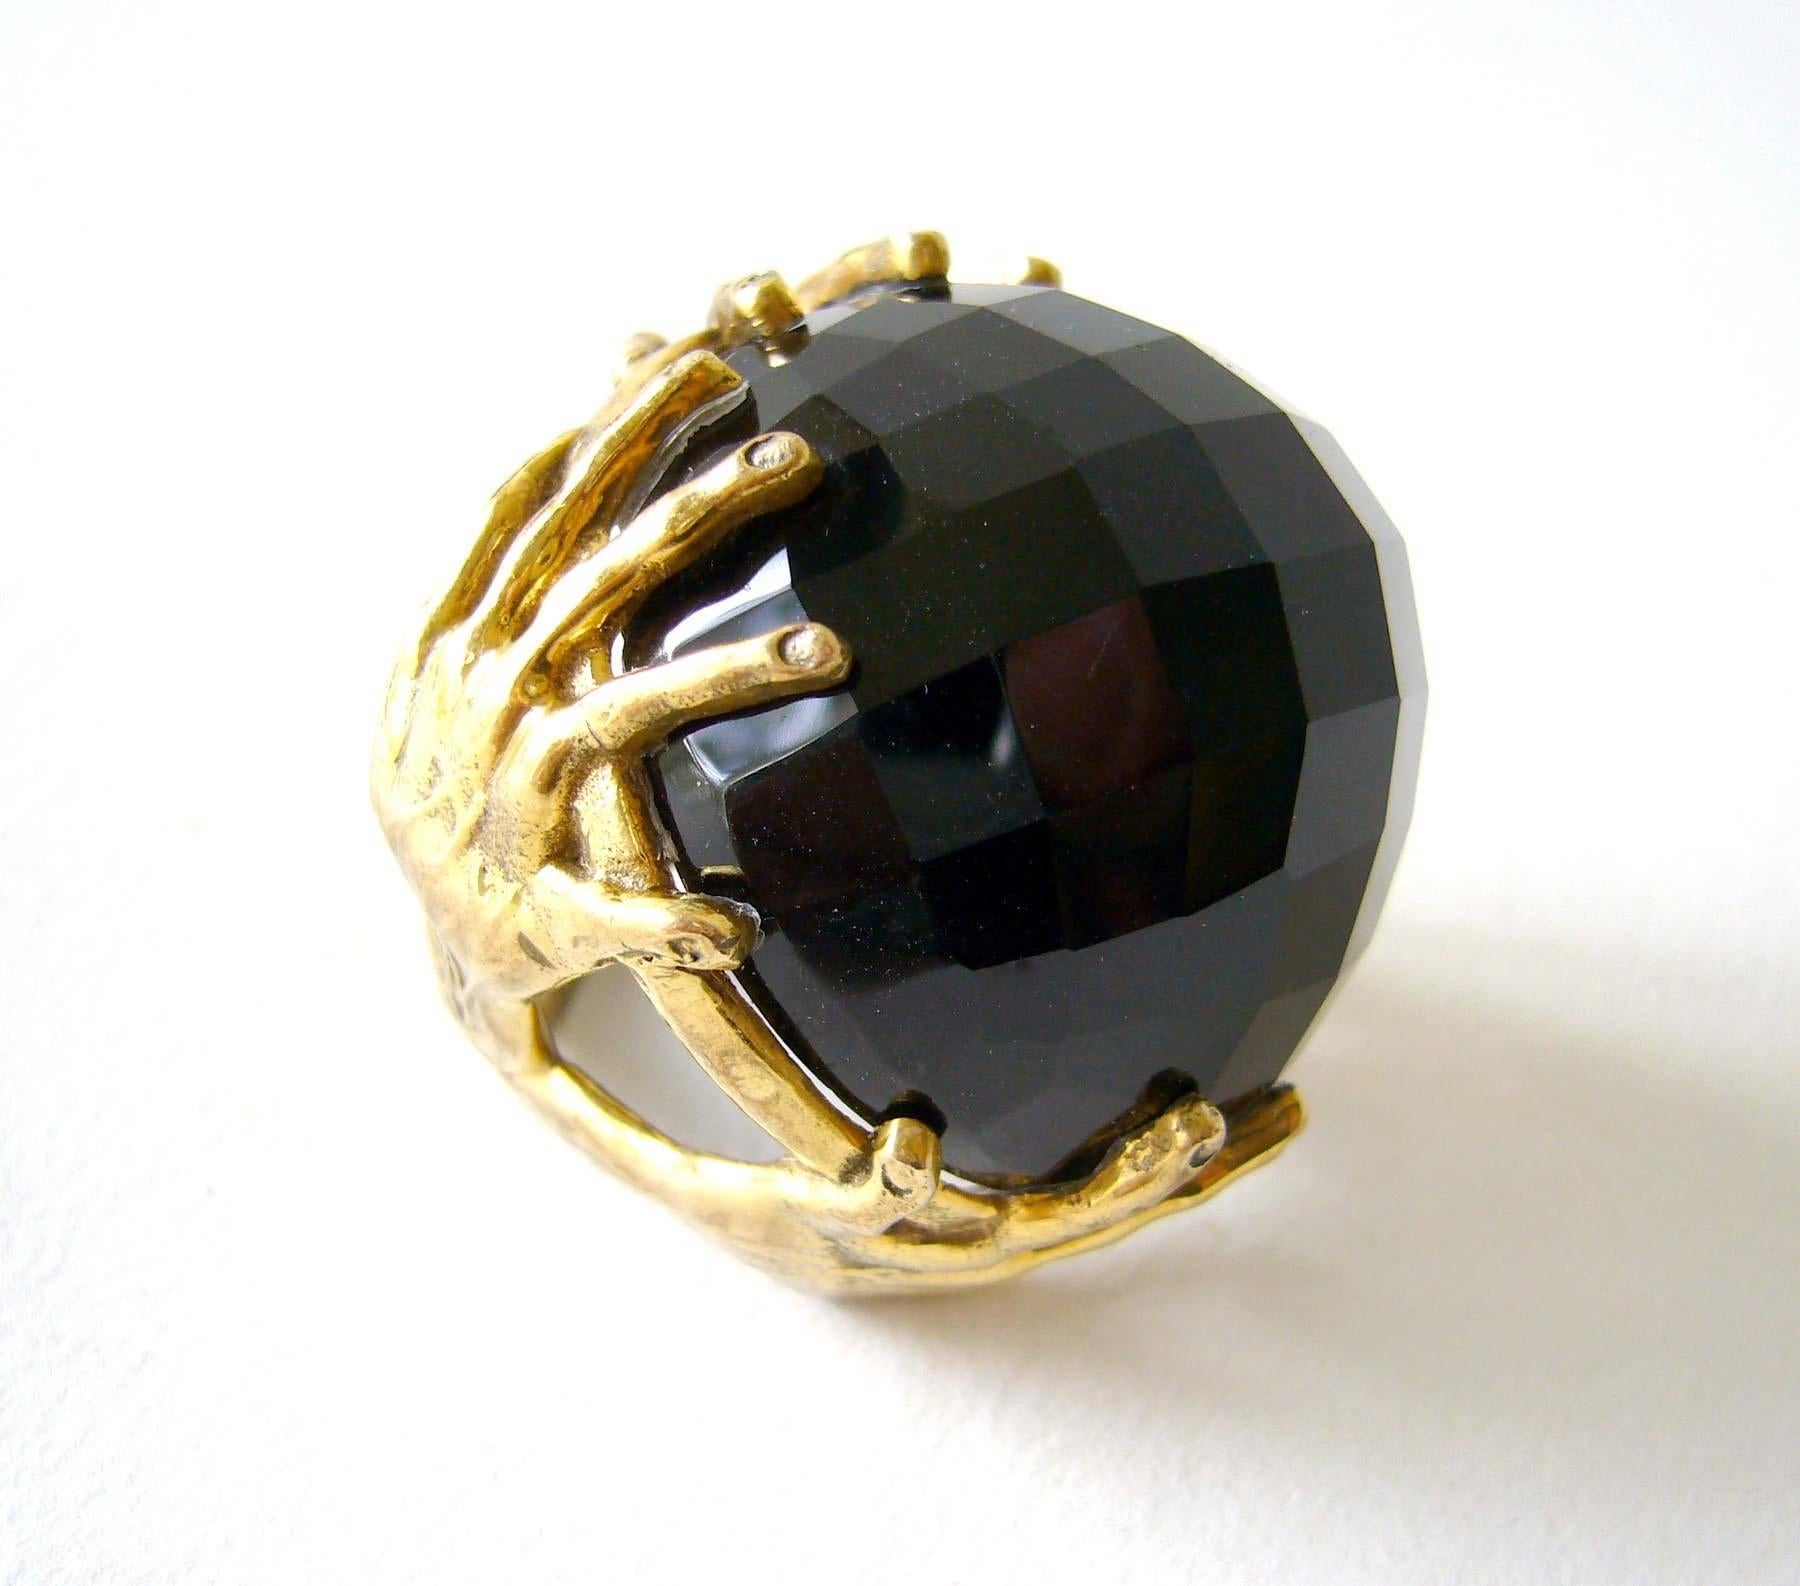 Large faceted smokey quartz sphere upheld by a surrealist bronze hands setting.  Sphere stands about .75